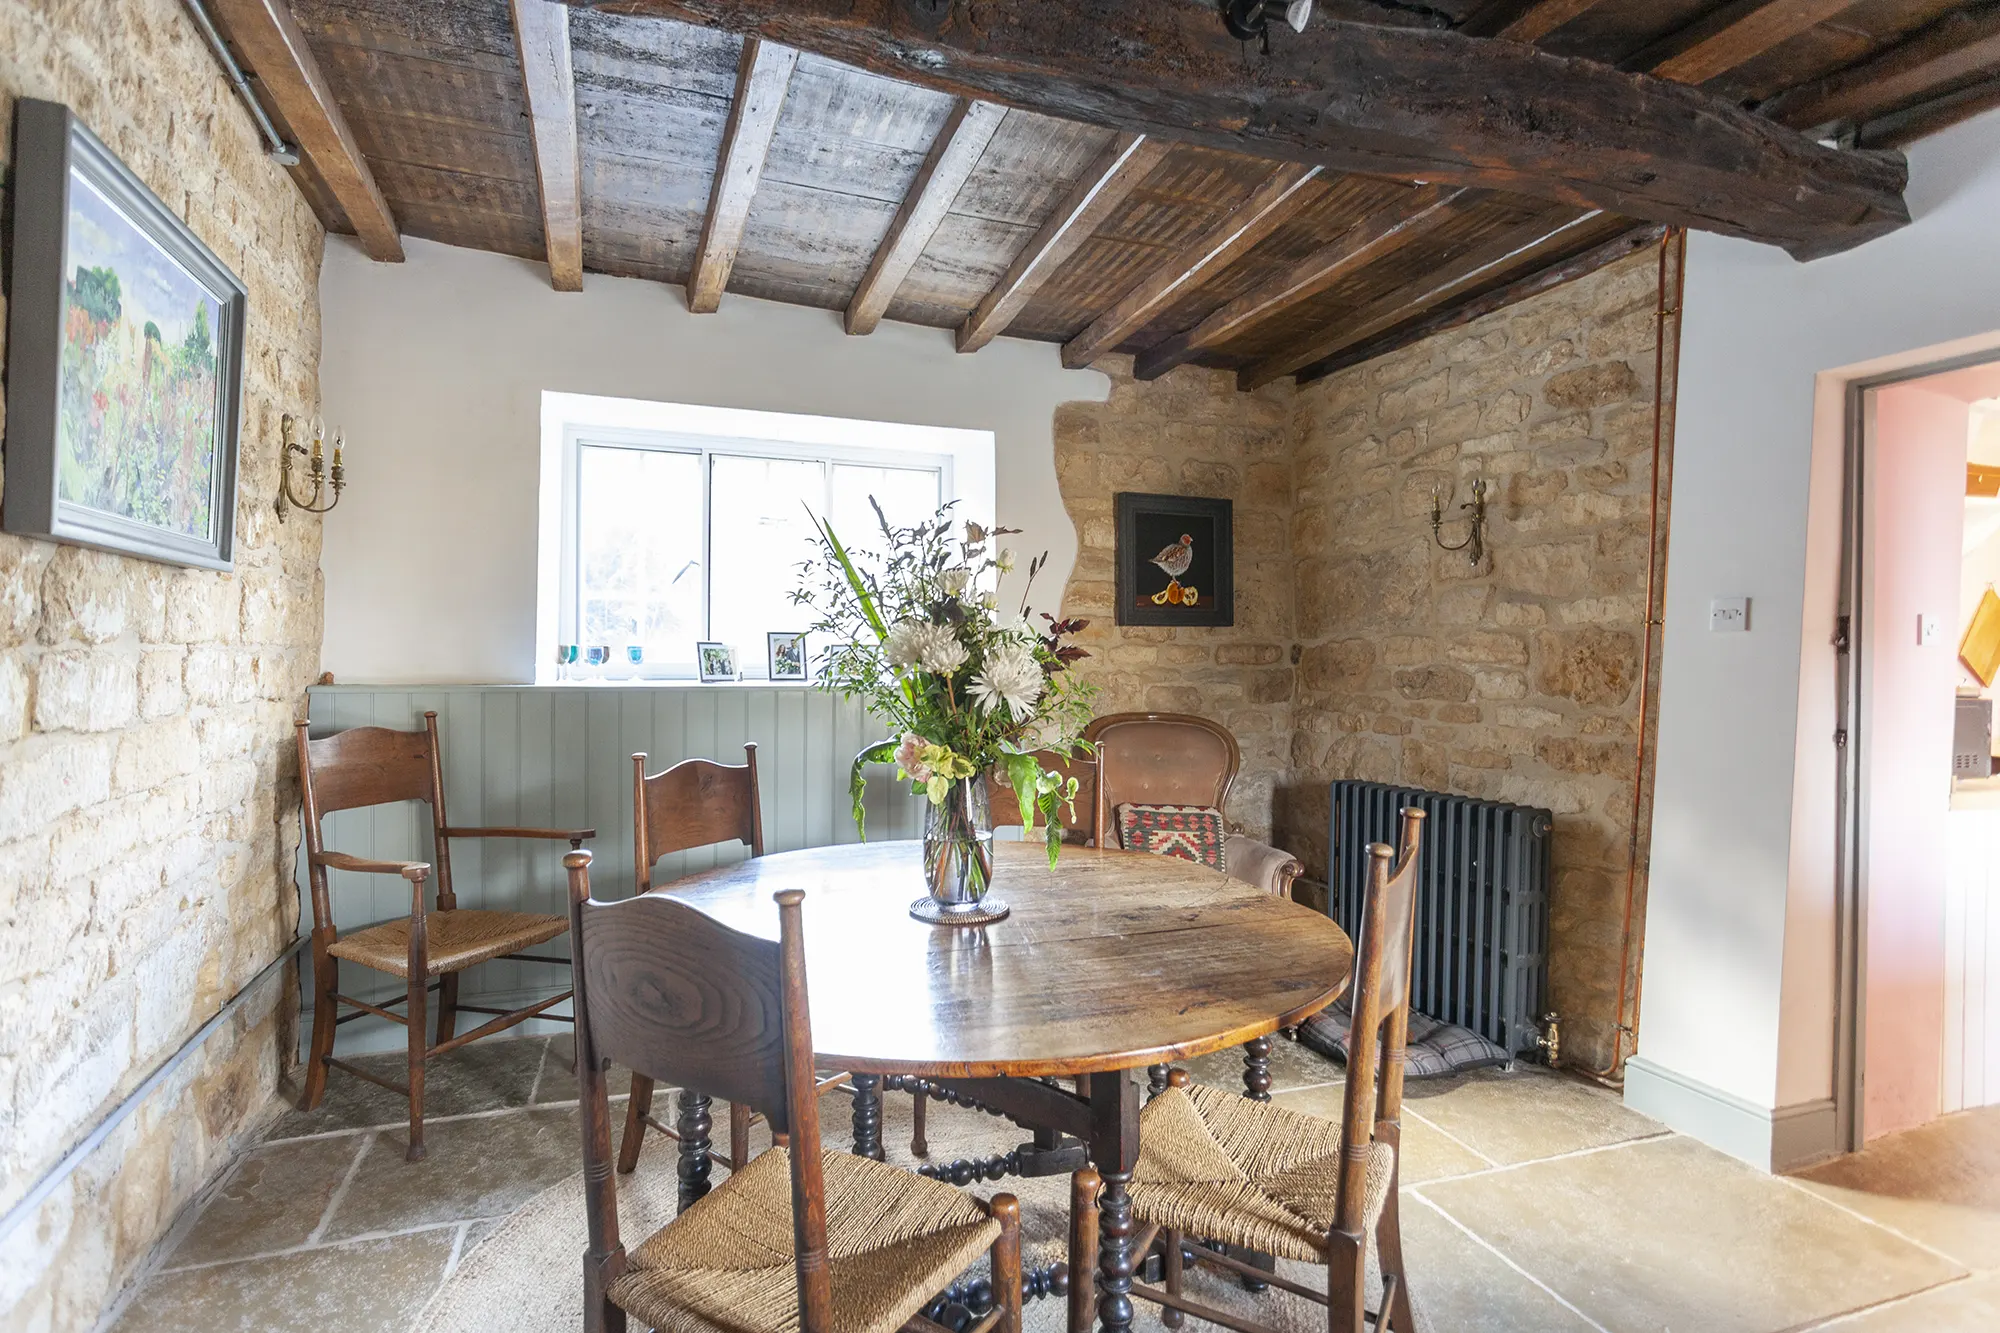 Dining area with oak beam ceiling